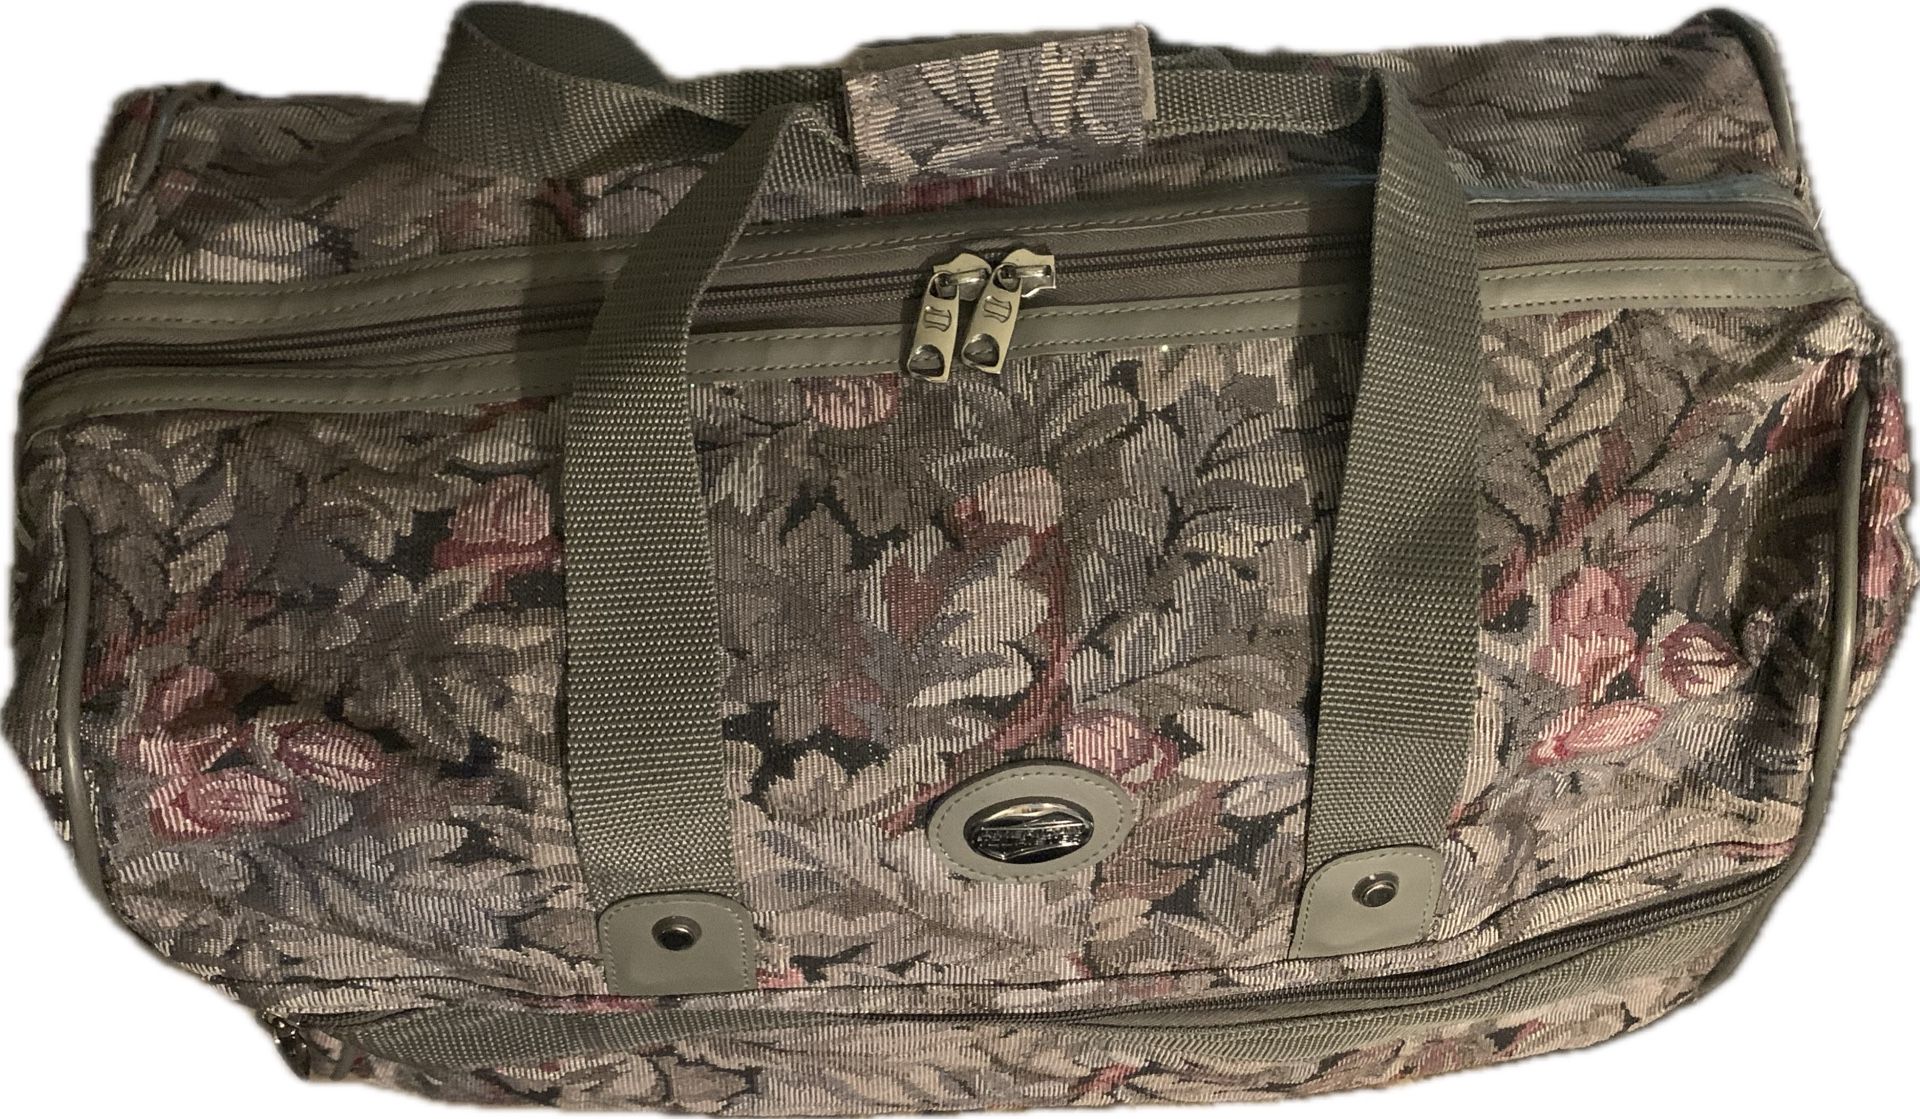 American Tourister Tapestry Duffle Bag, Top Zip, Carry On